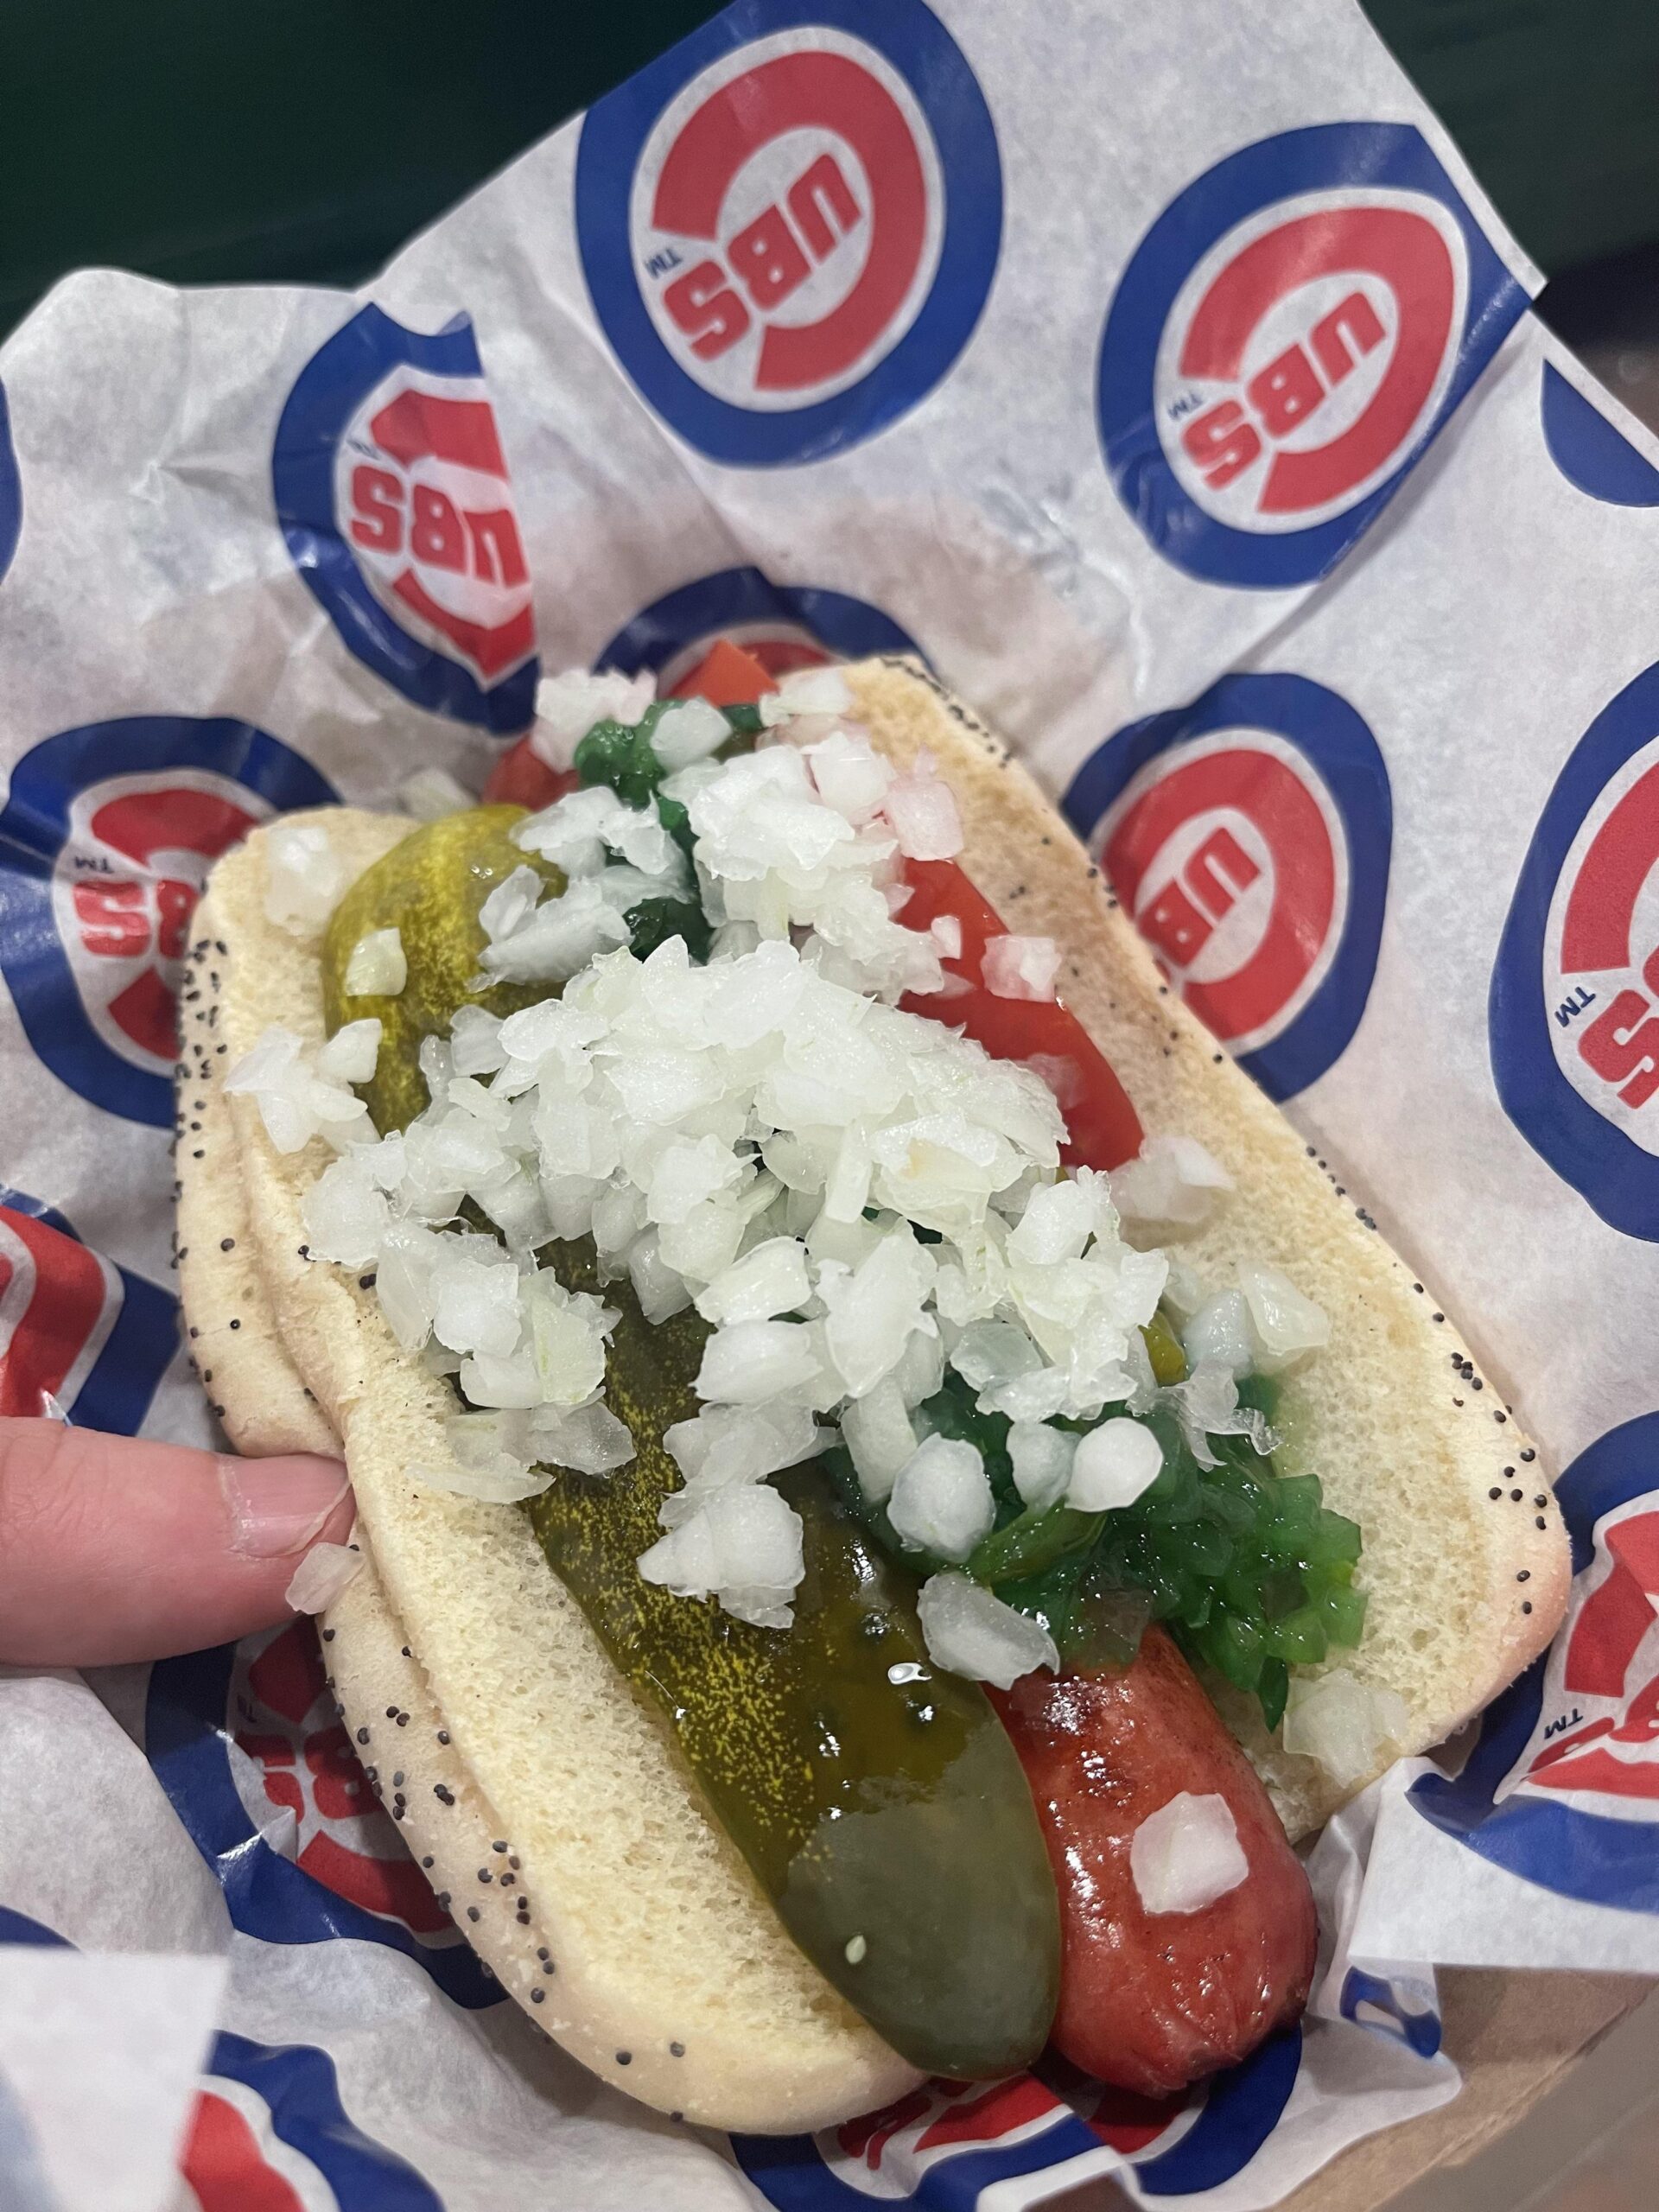 Hot dog at Wrigley Field Dining and Cooking